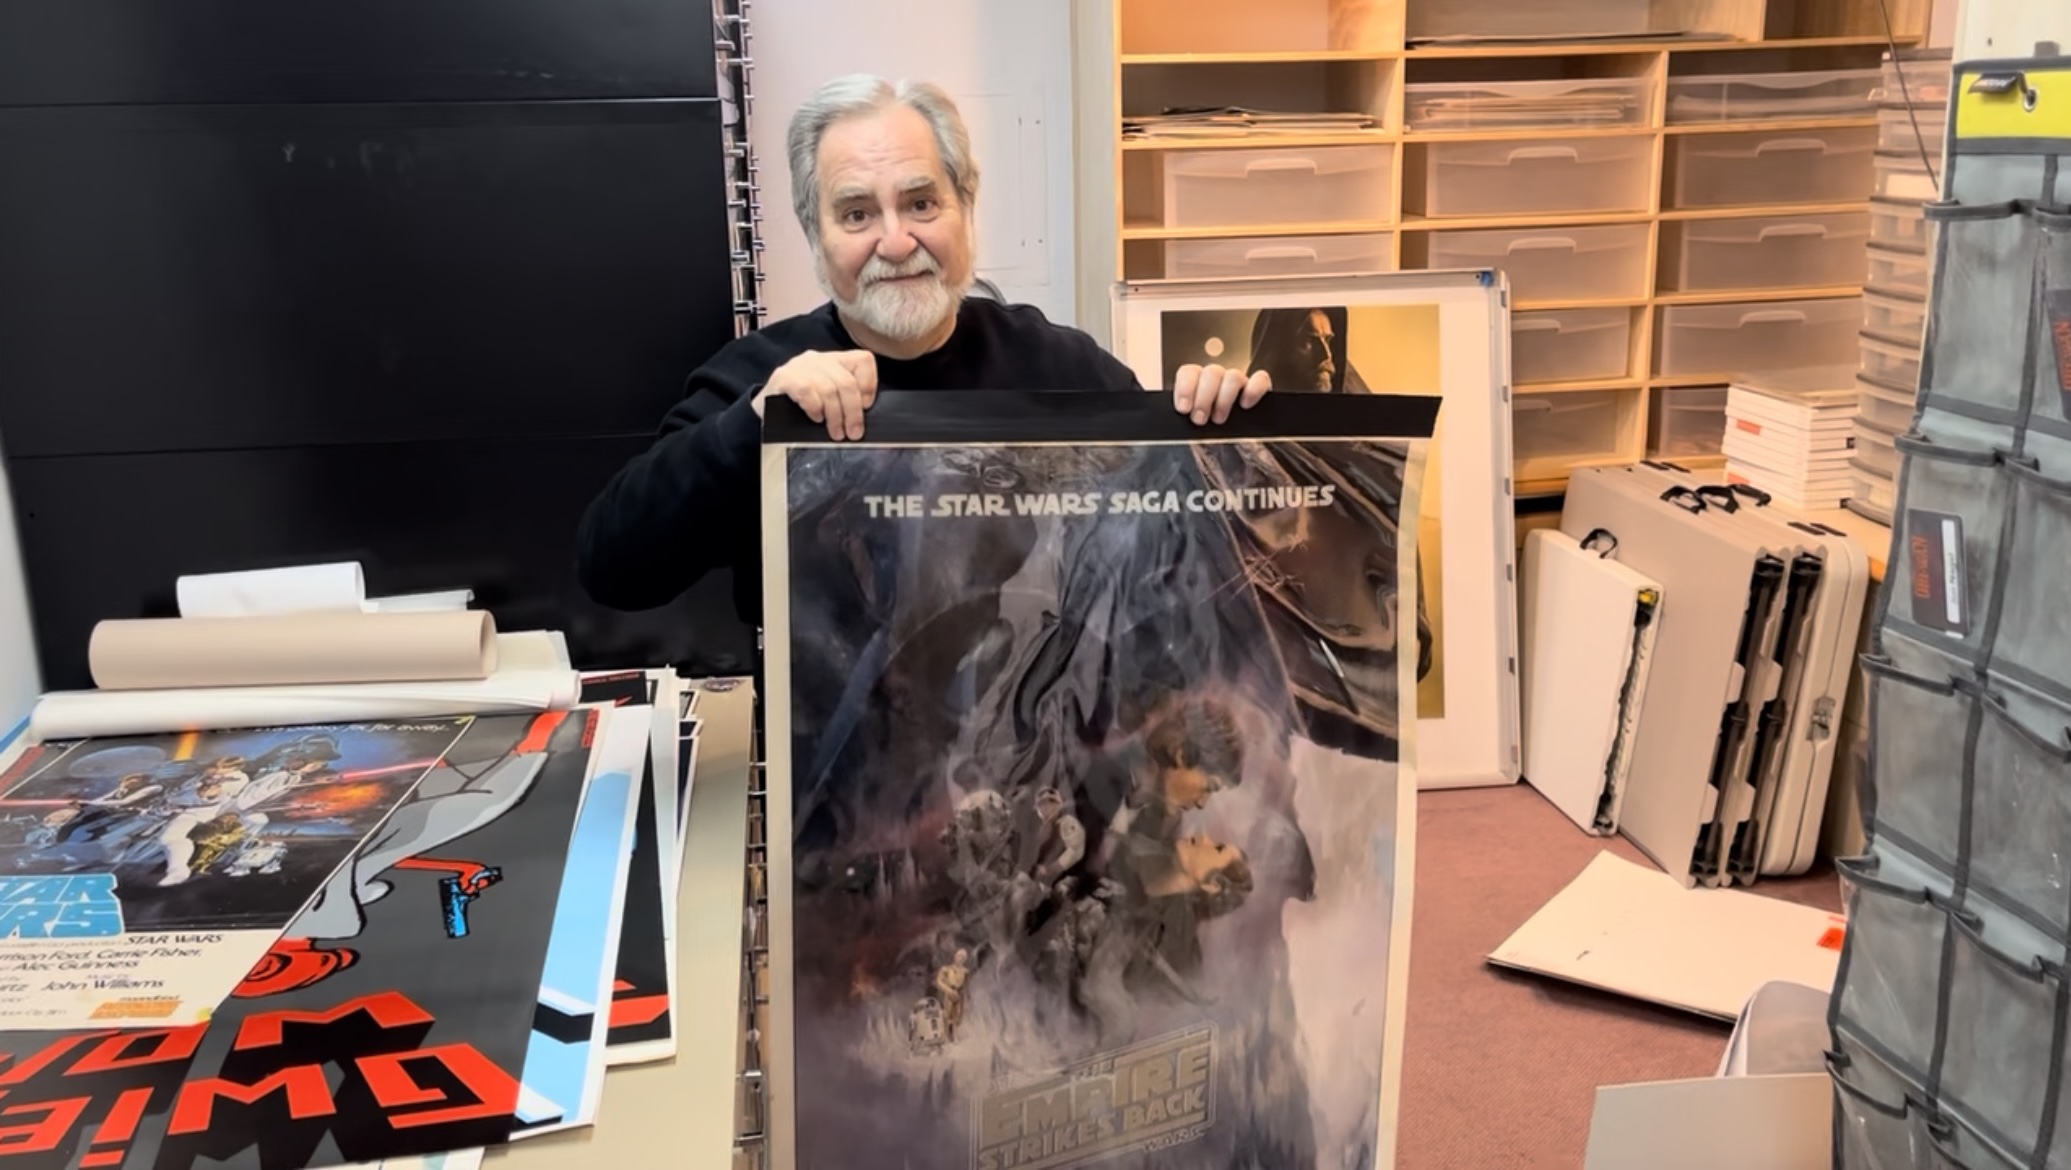 Steve Sansweet with rare Star Wars poster discovered in our collection.